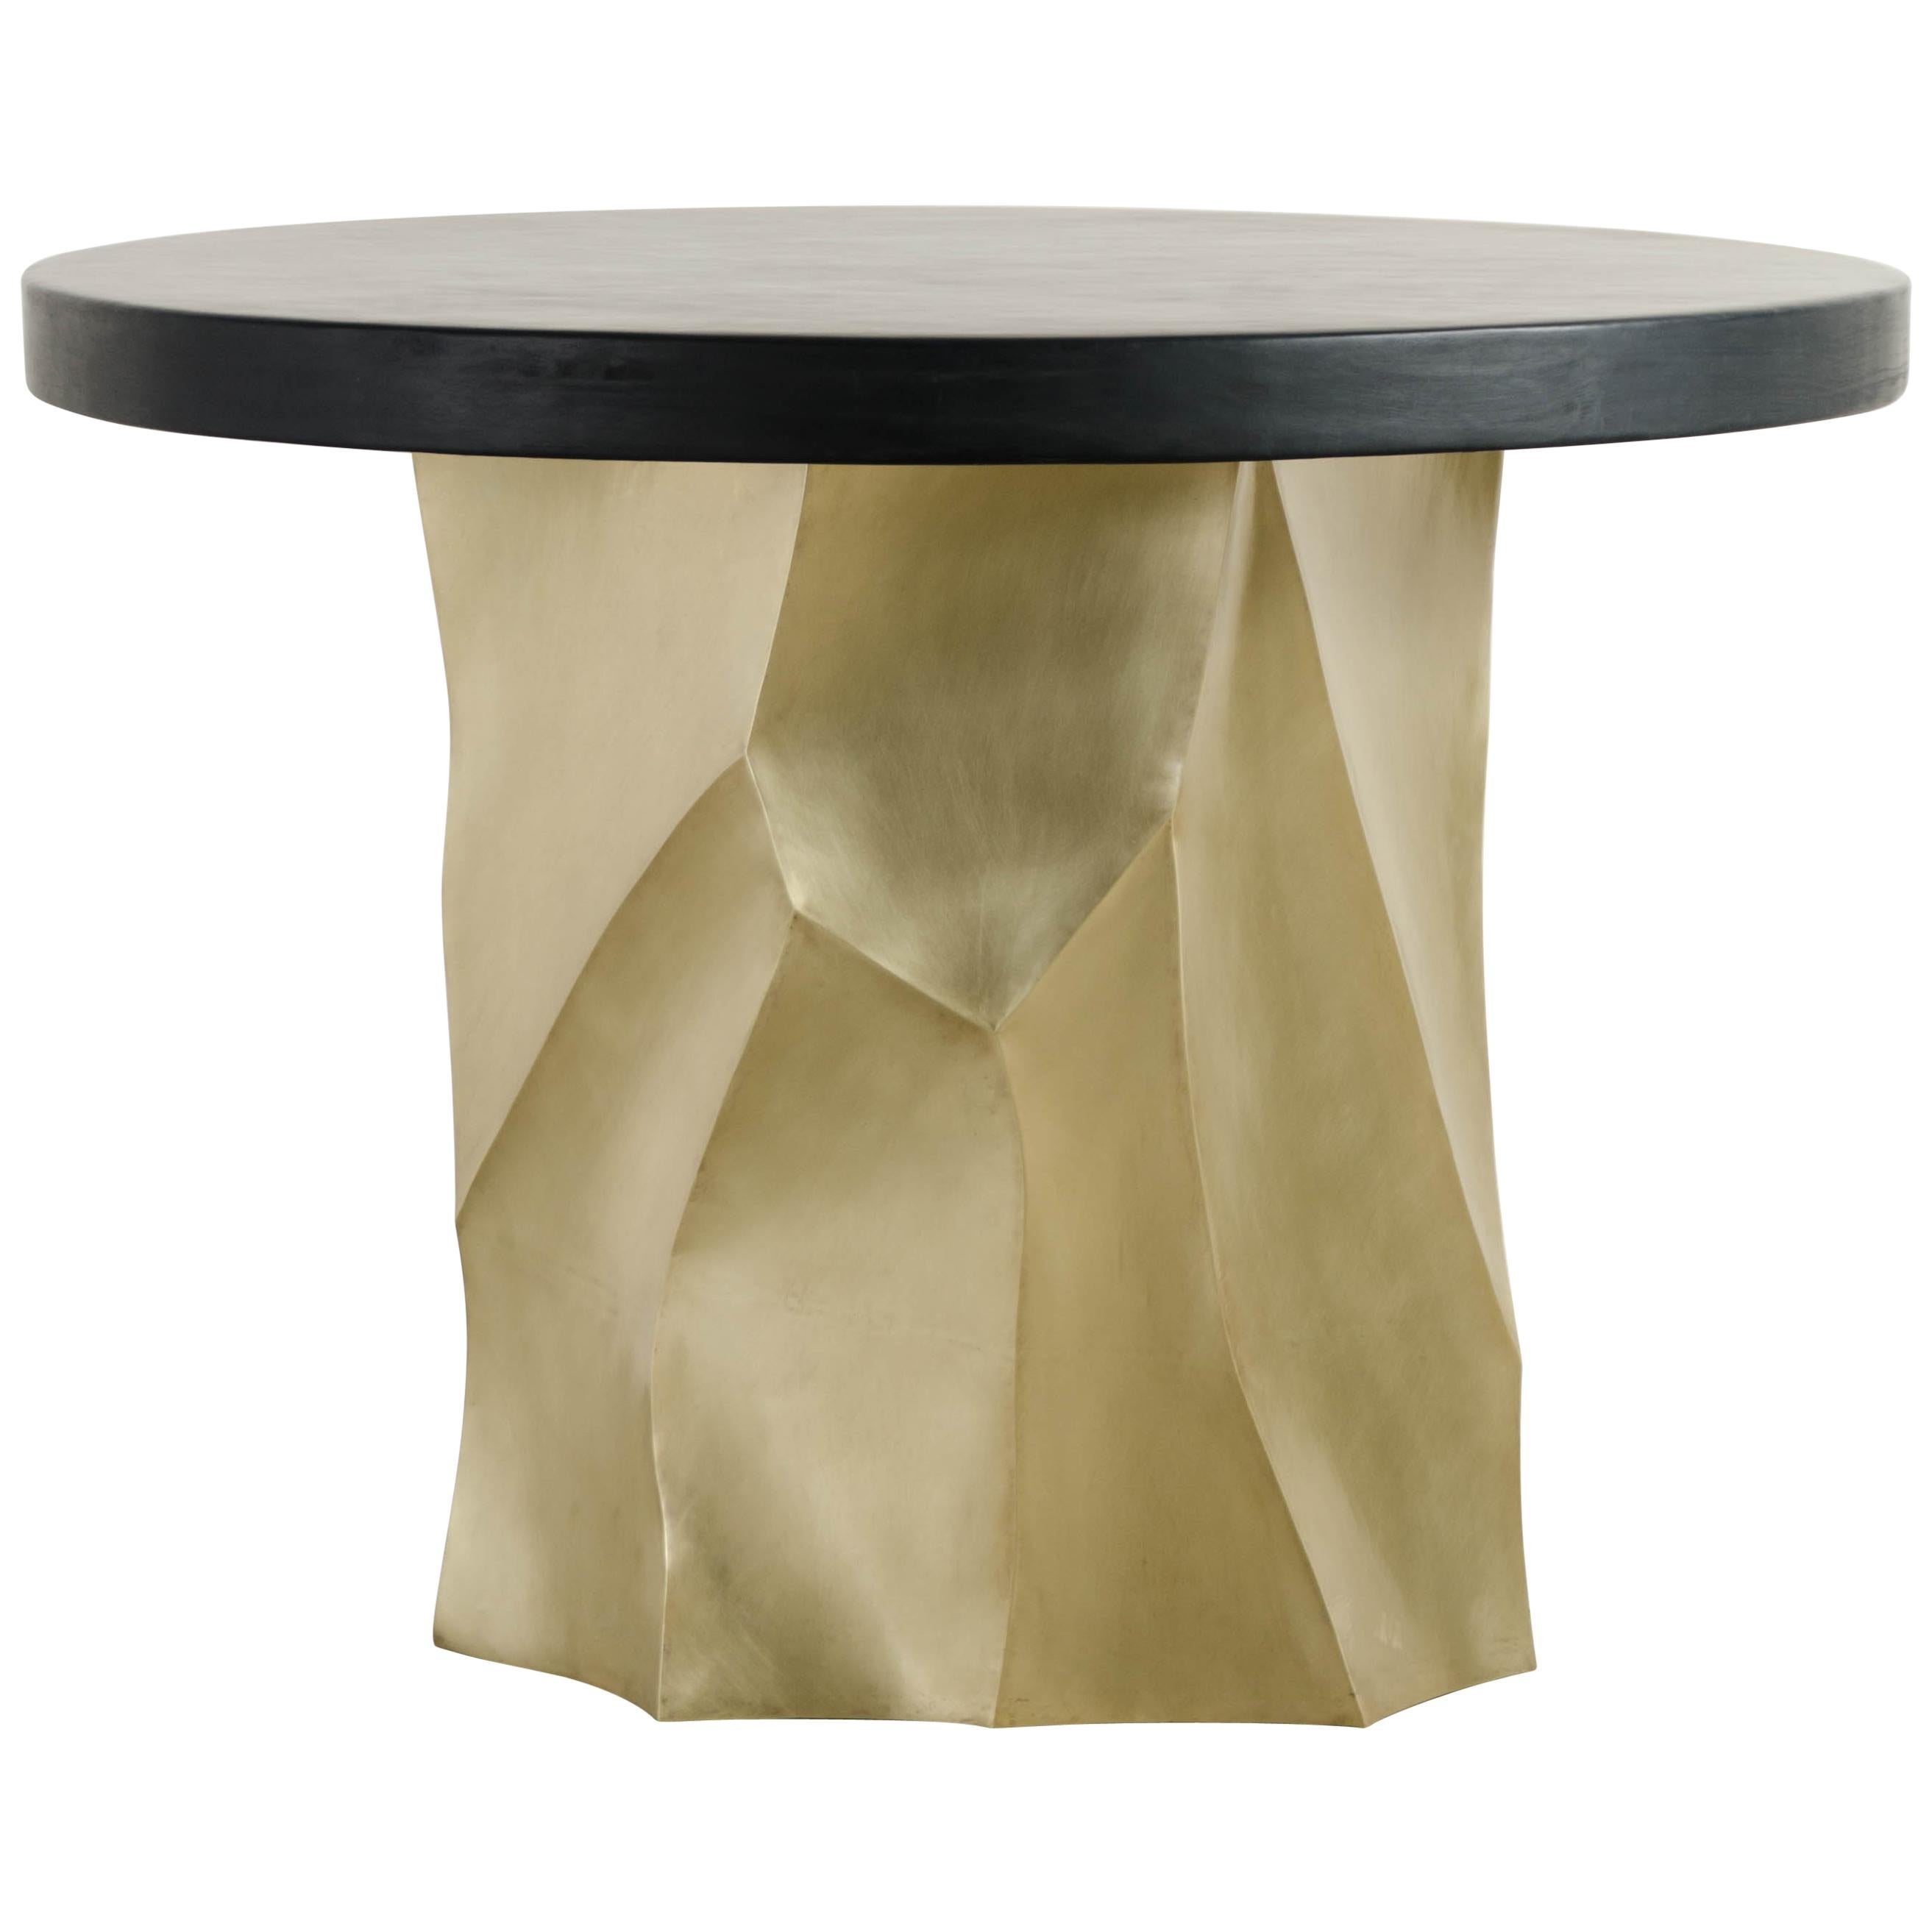 Black Lacquer Entry Table Top by Robert Kuo, Limited Edition